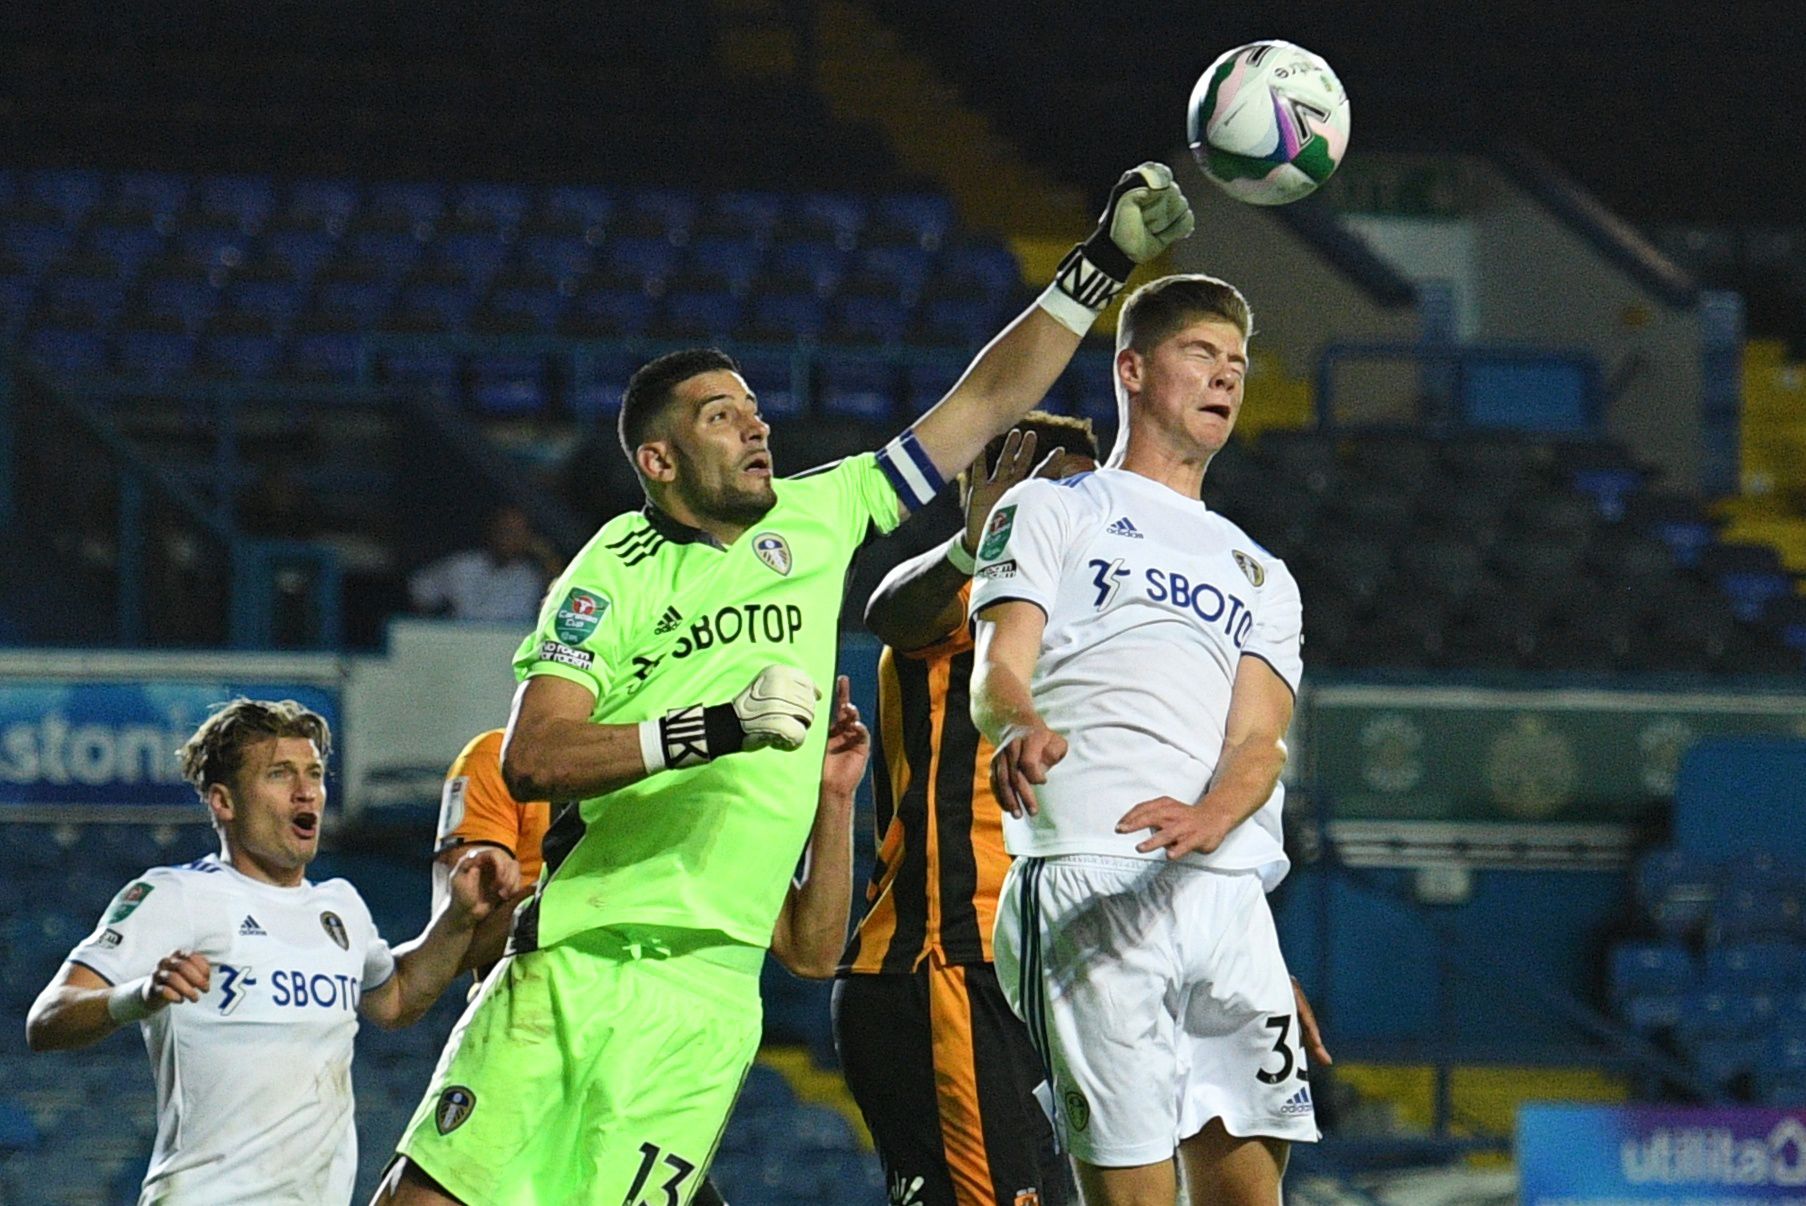 Soccer Football - Carabao Cup Second Round - Leeds United v Hull City - Elland Road, Leeds, Britain - September 16, 2020 Leeds United's Charlie Cresswell and Kiko Casilla in action Pool via REUTERS/Oli Scarff EDITORIAL USE ONLY. No use with unauthorized audio, video, data, fixture lists, club/league logos or 'live' services. Online in-match use limited to 75 images, no video emulation. No use in betting, games or single club/league/player publications.  Please contact your account representative